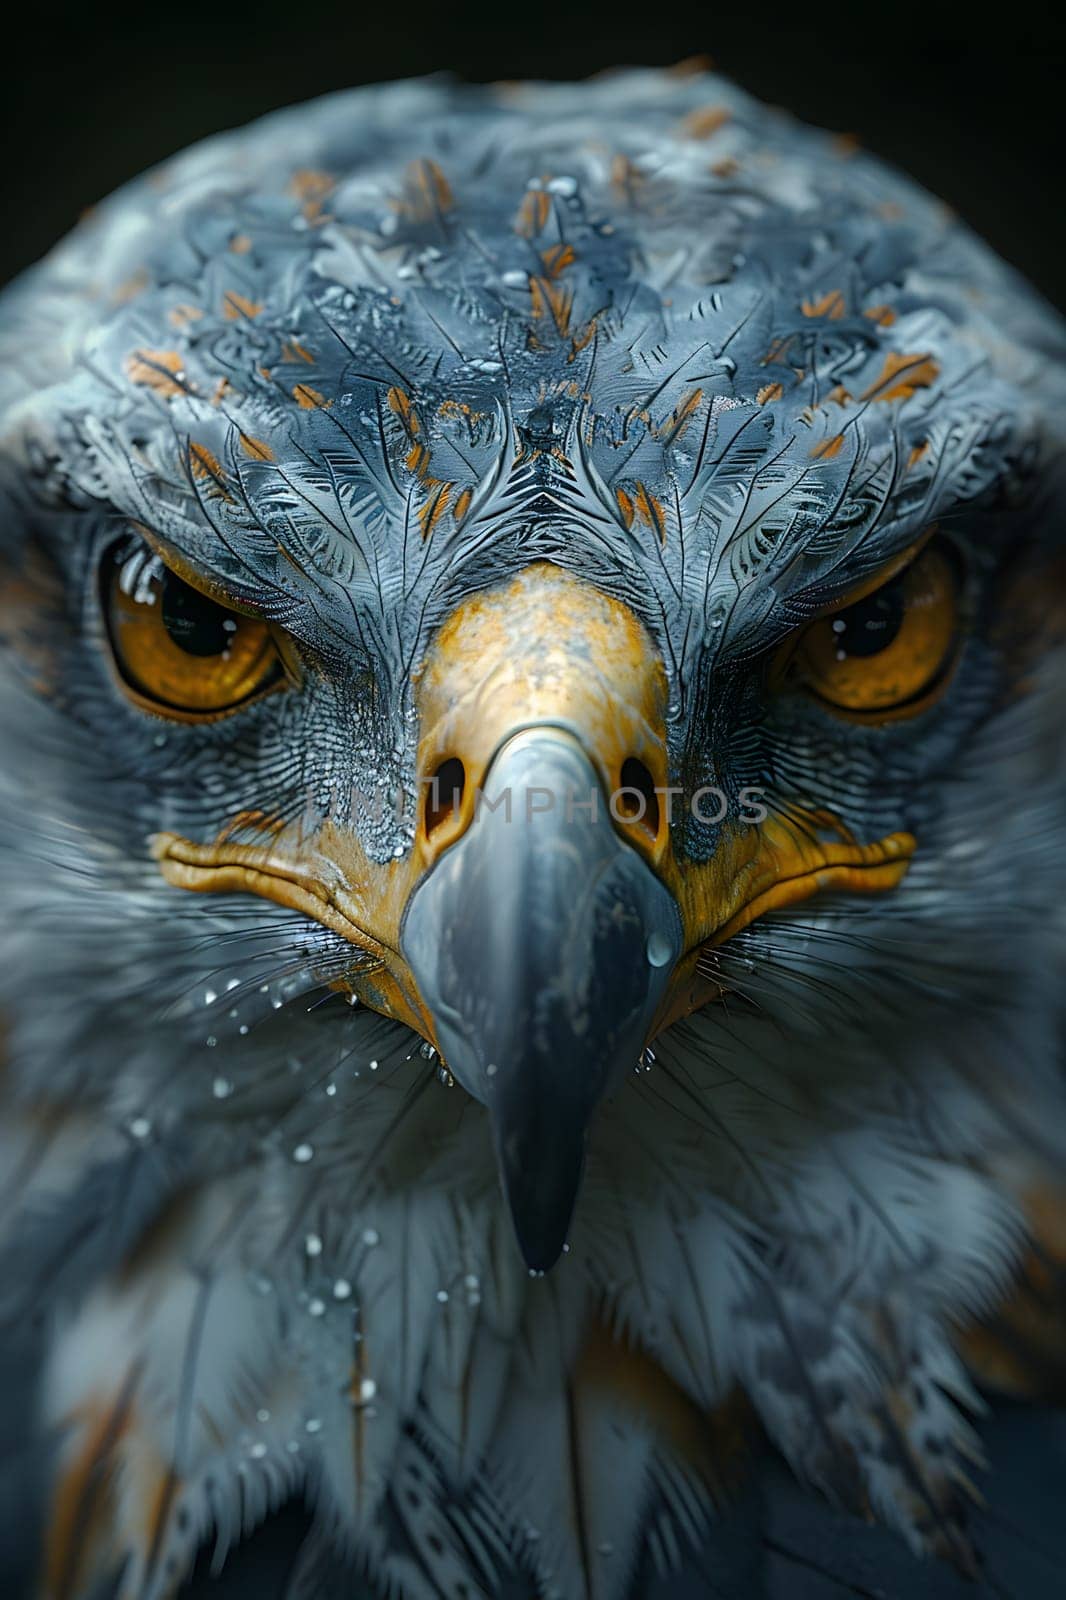 Close up of Accipitridae eagles face with water drops on grey feathers by Nadtochiy